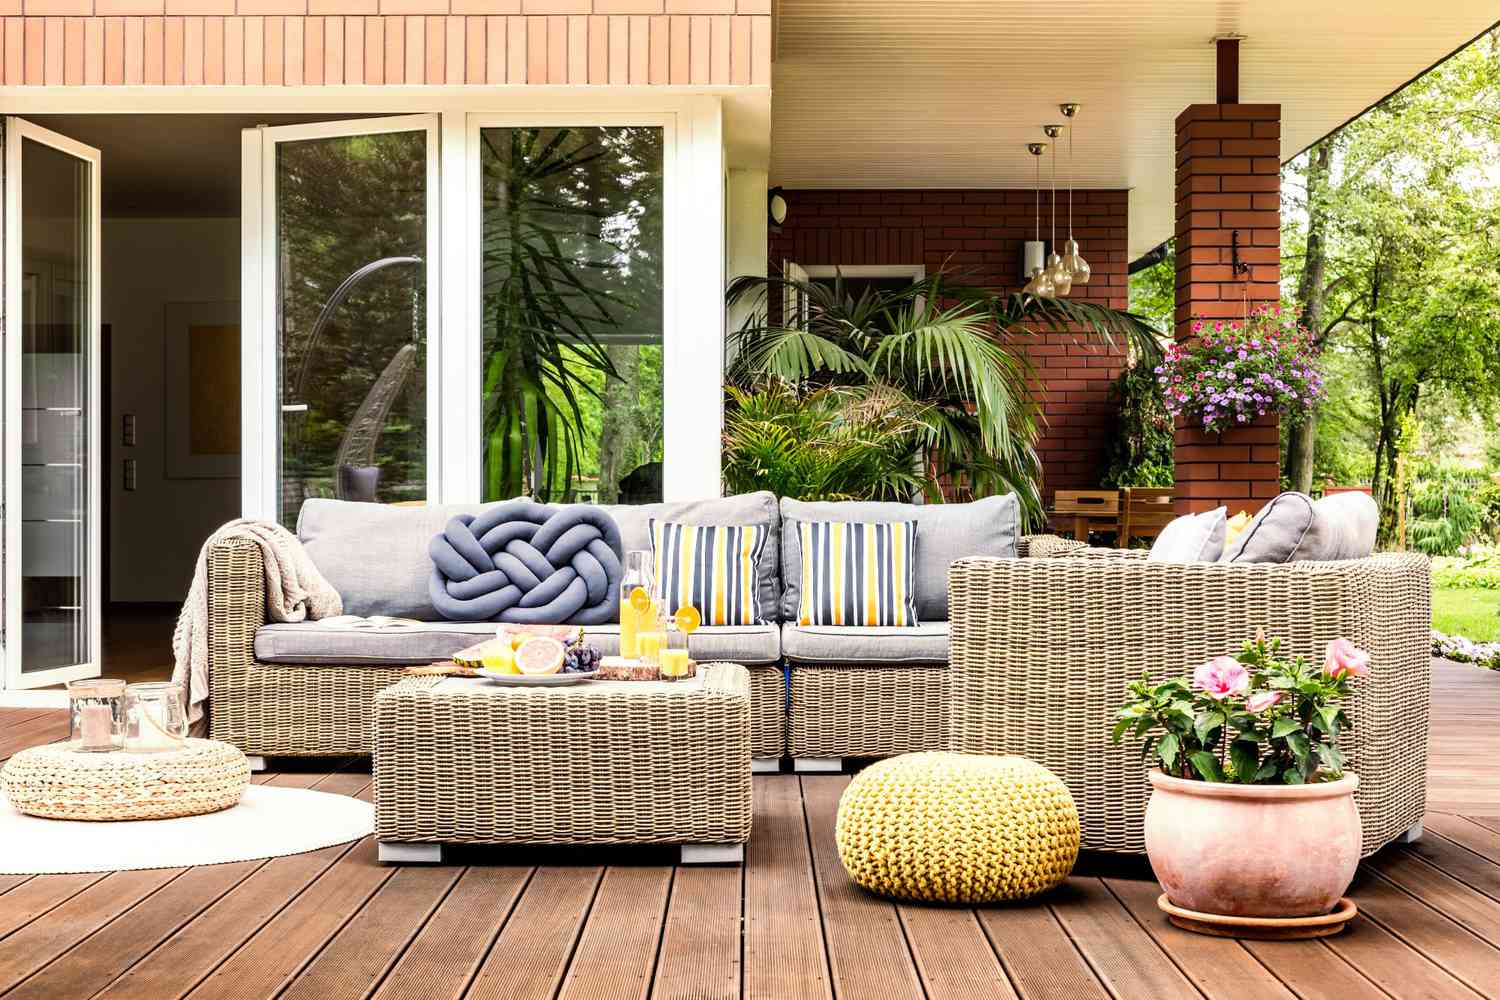 Maintaining and cleaning outdoor spaces enhances the overall appeal of your home and provides a pleasant environment for relaxation and entertaining.